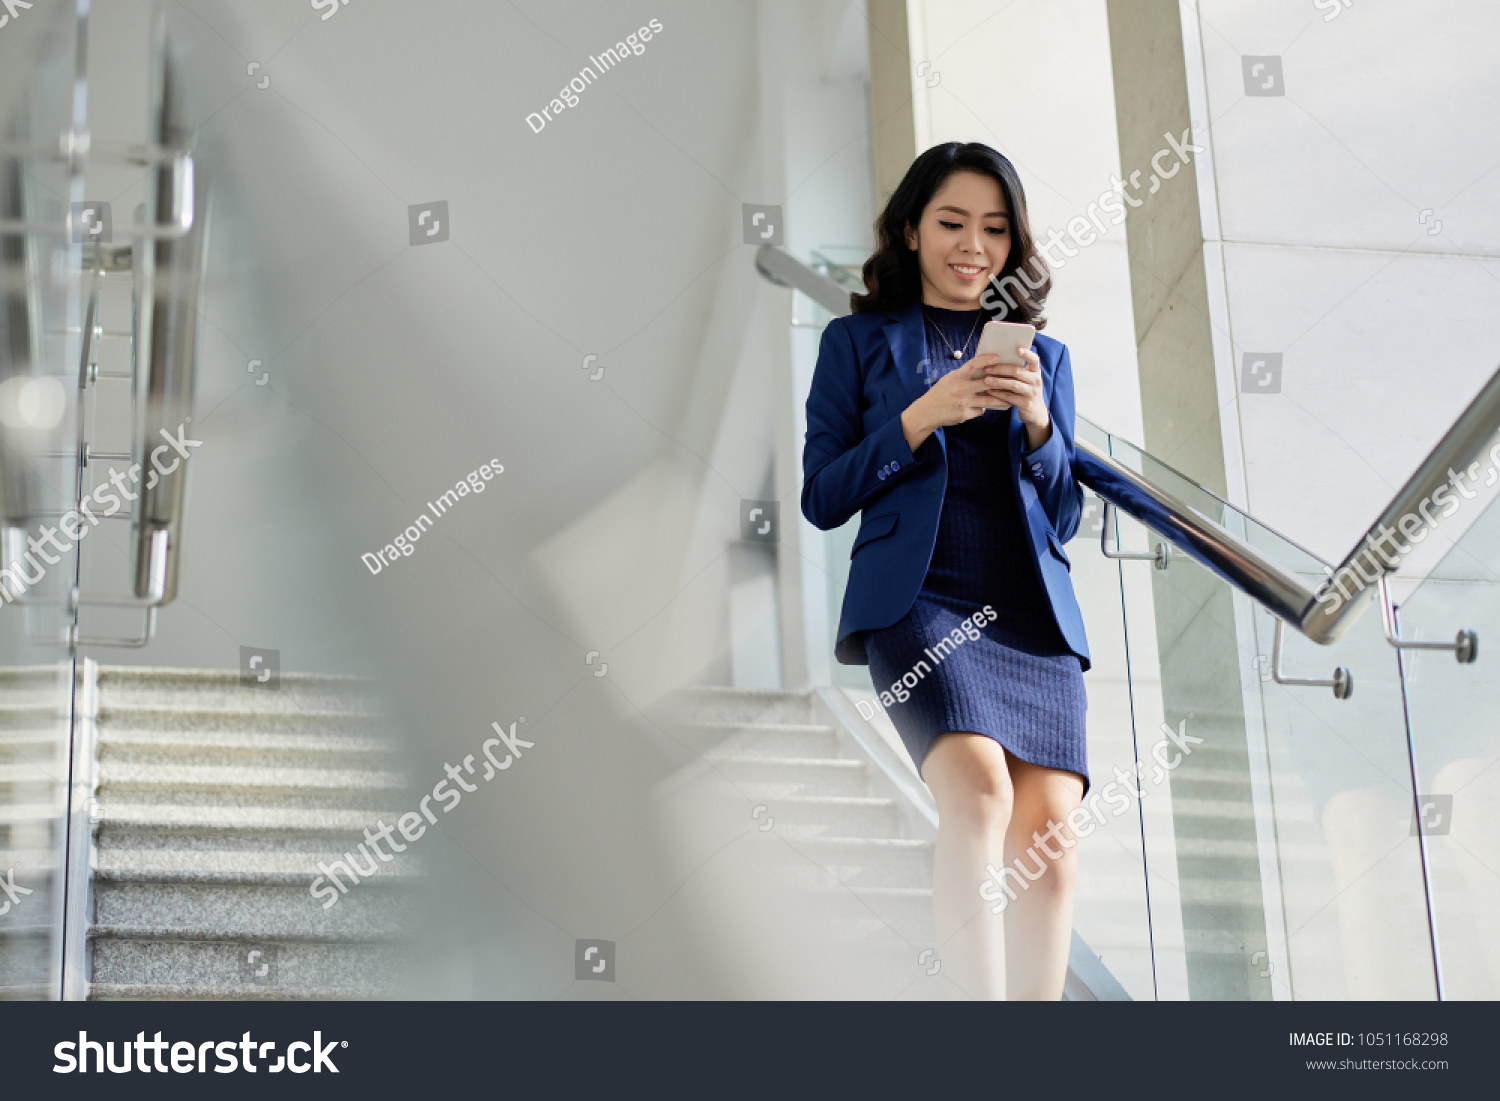 Smiling Asian manager in formalwear texting with friend on smartphone while going downstairs, portrait shot #1051168298